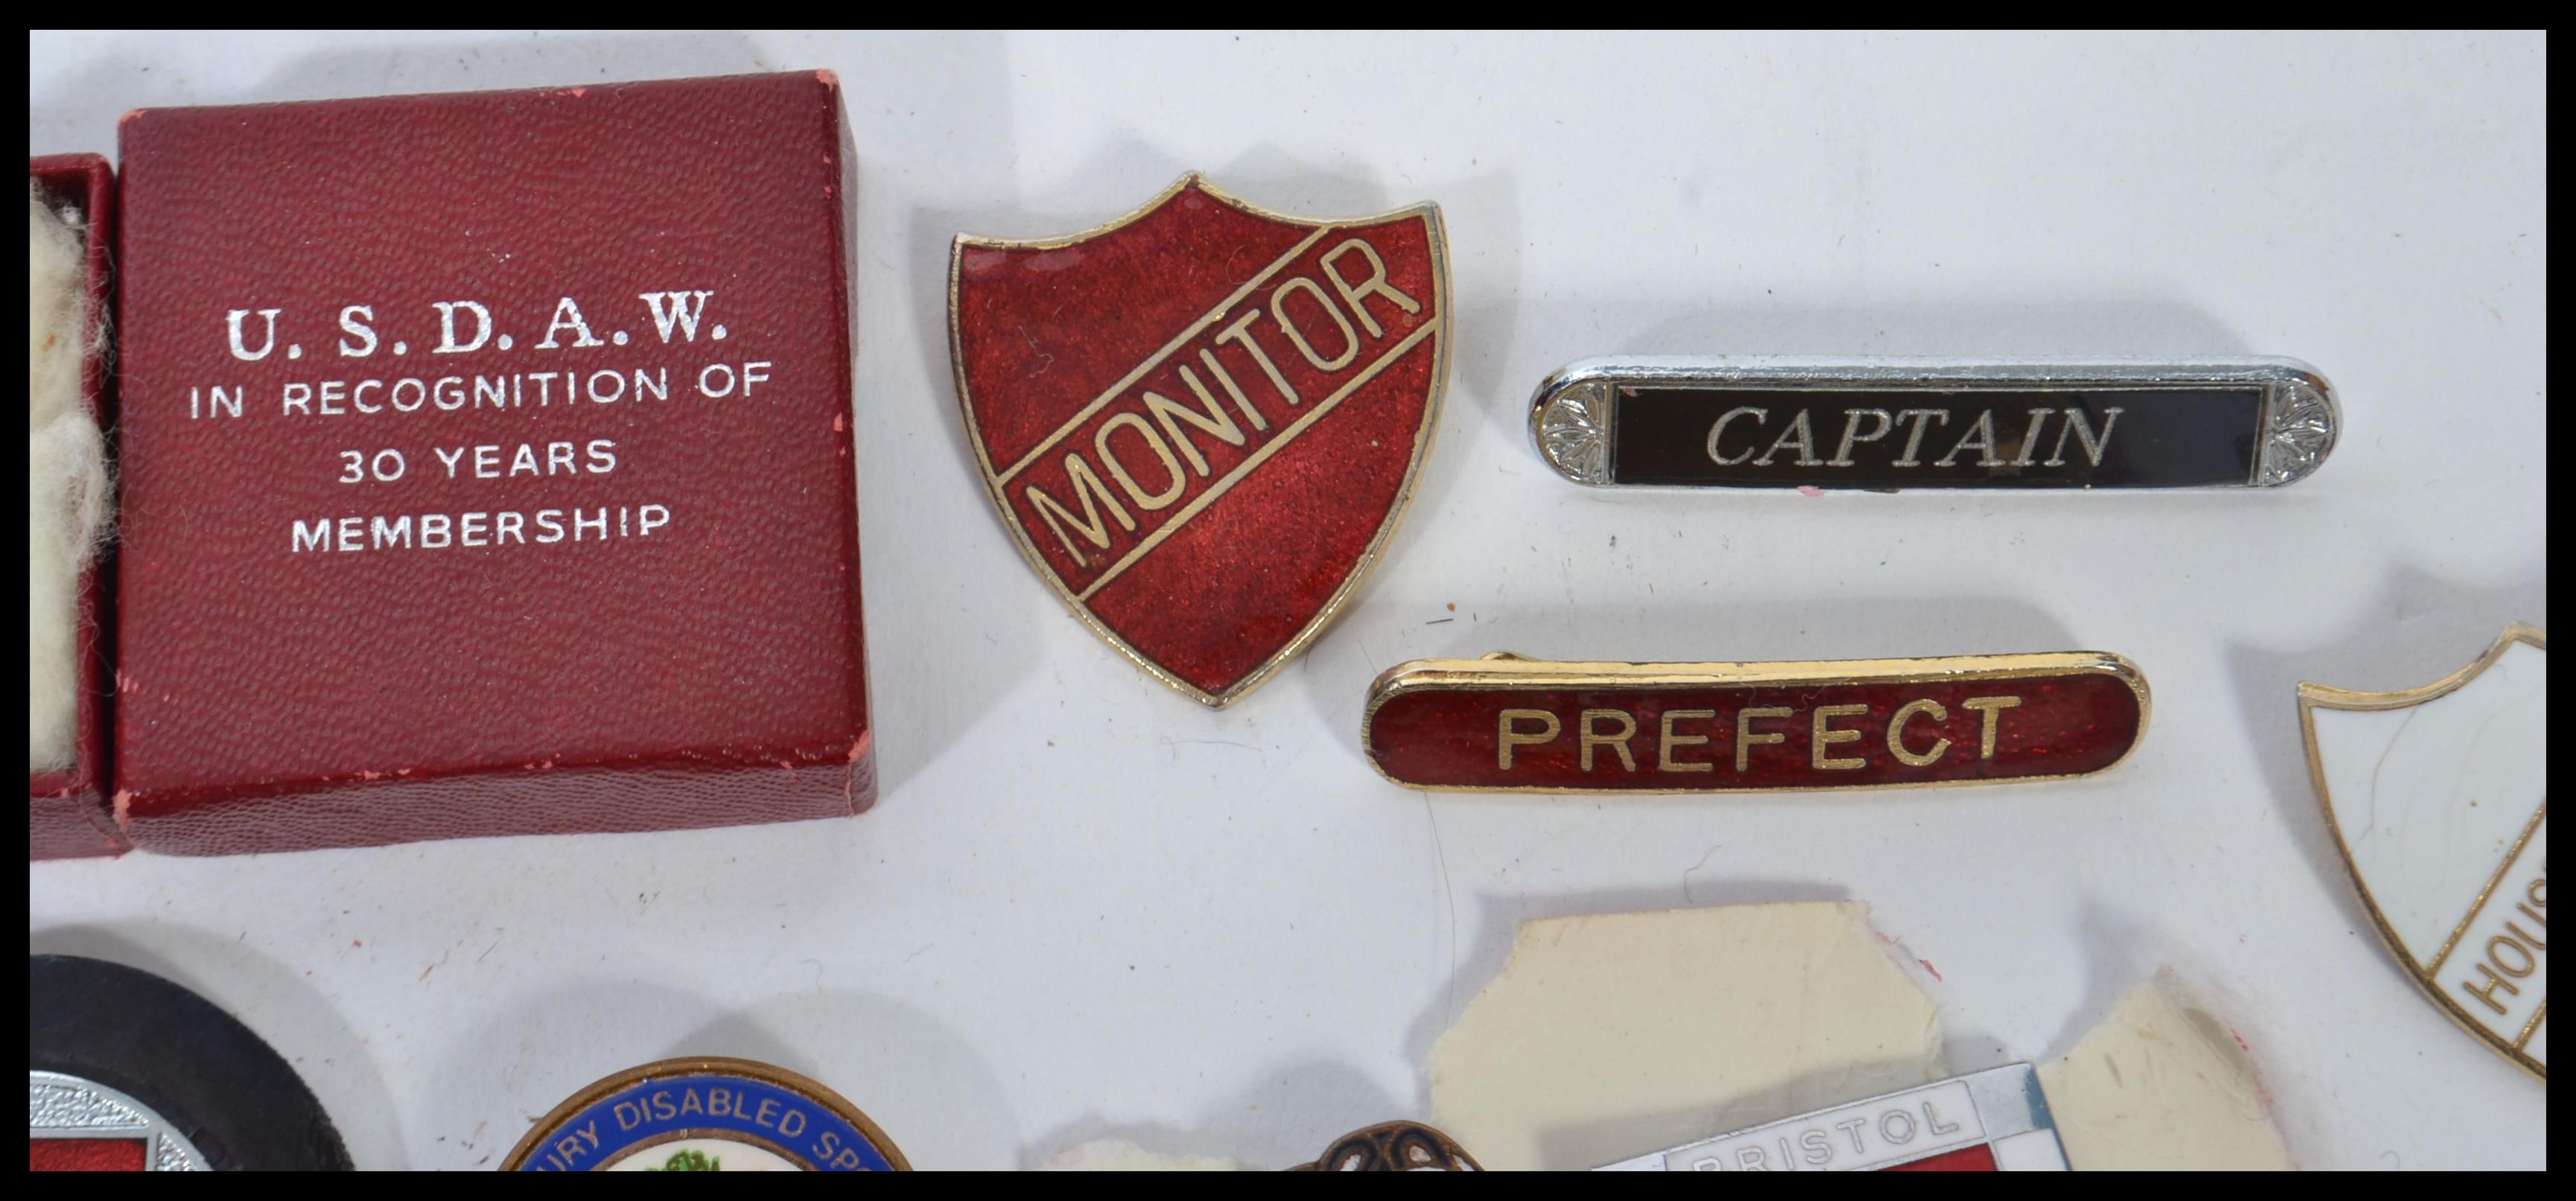 A good collection of vintage Enamel pin badges dating from the first half of the 20th century to - Image 8 of 10